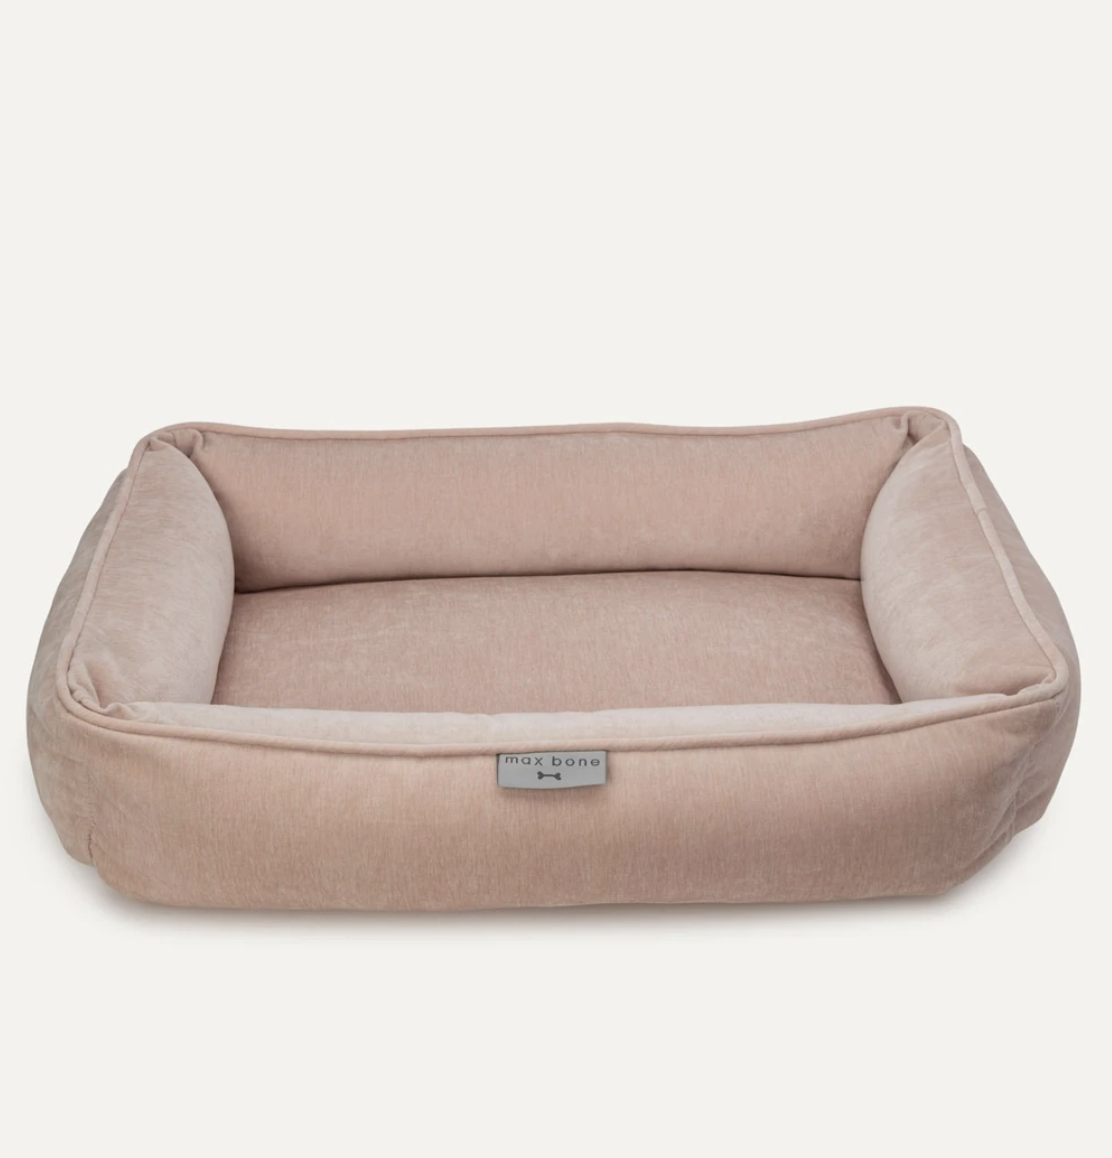 Max Bone Dog Bed in The Dapple's Black Friday Sales Round Up for Dog Lovers Including Dog Treats, Dog Toys, and Dog Beds on Sale